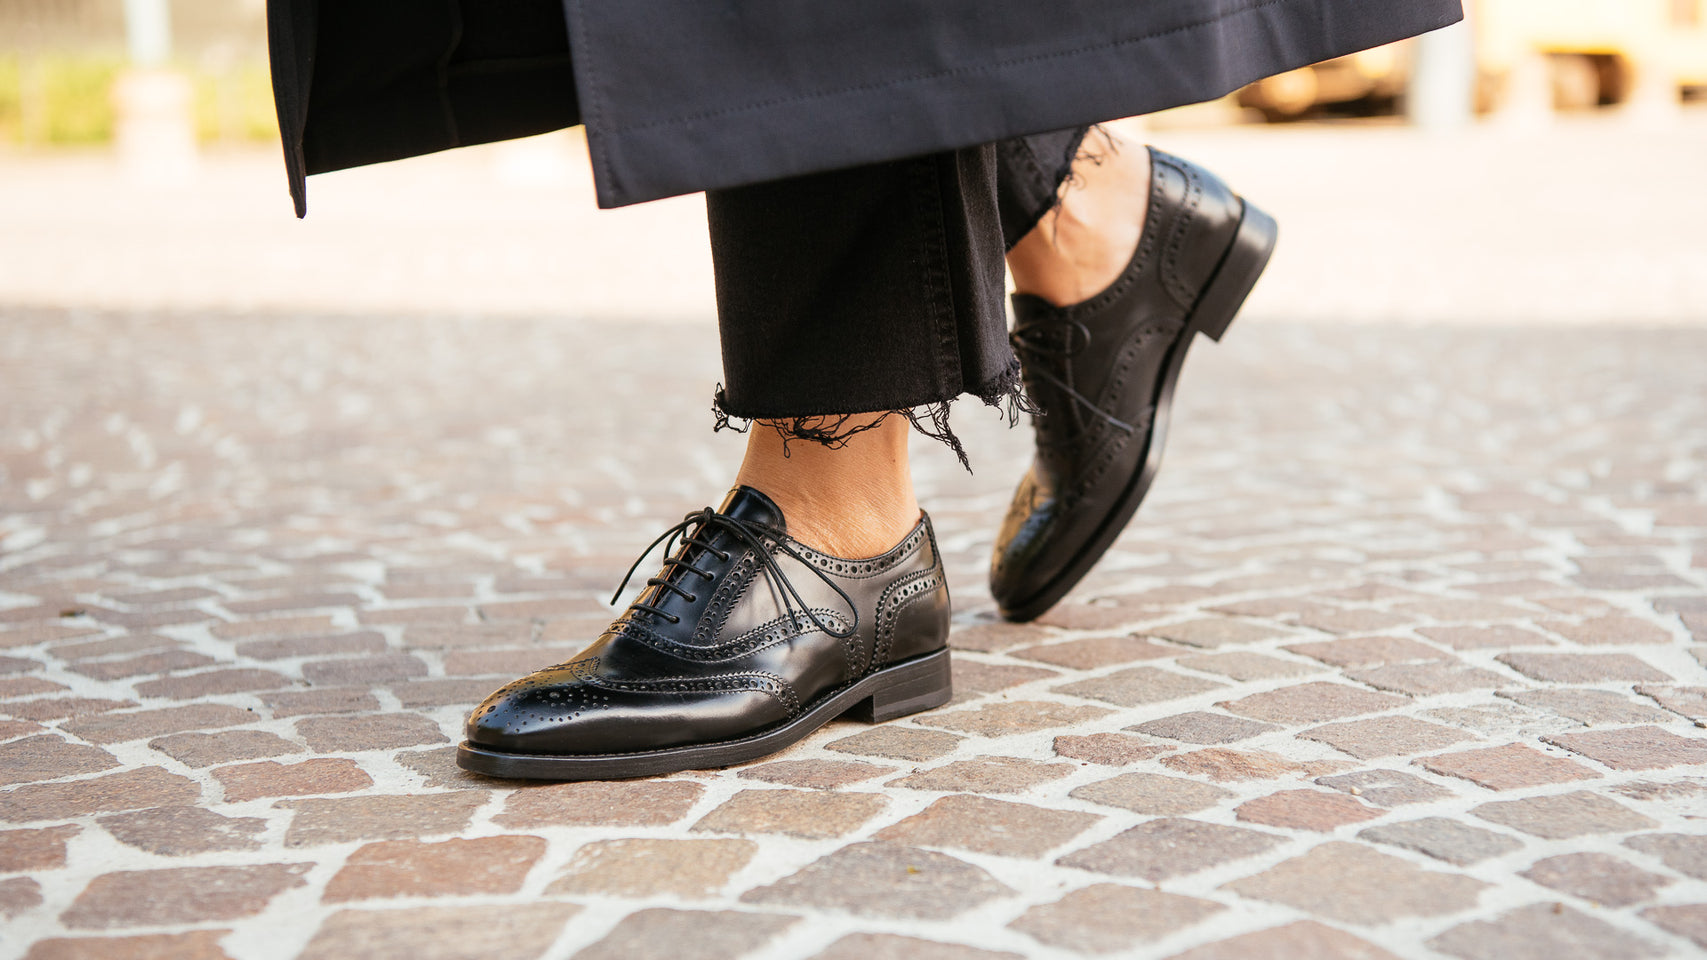 Velasca | Women's Oxfords shoes in leather